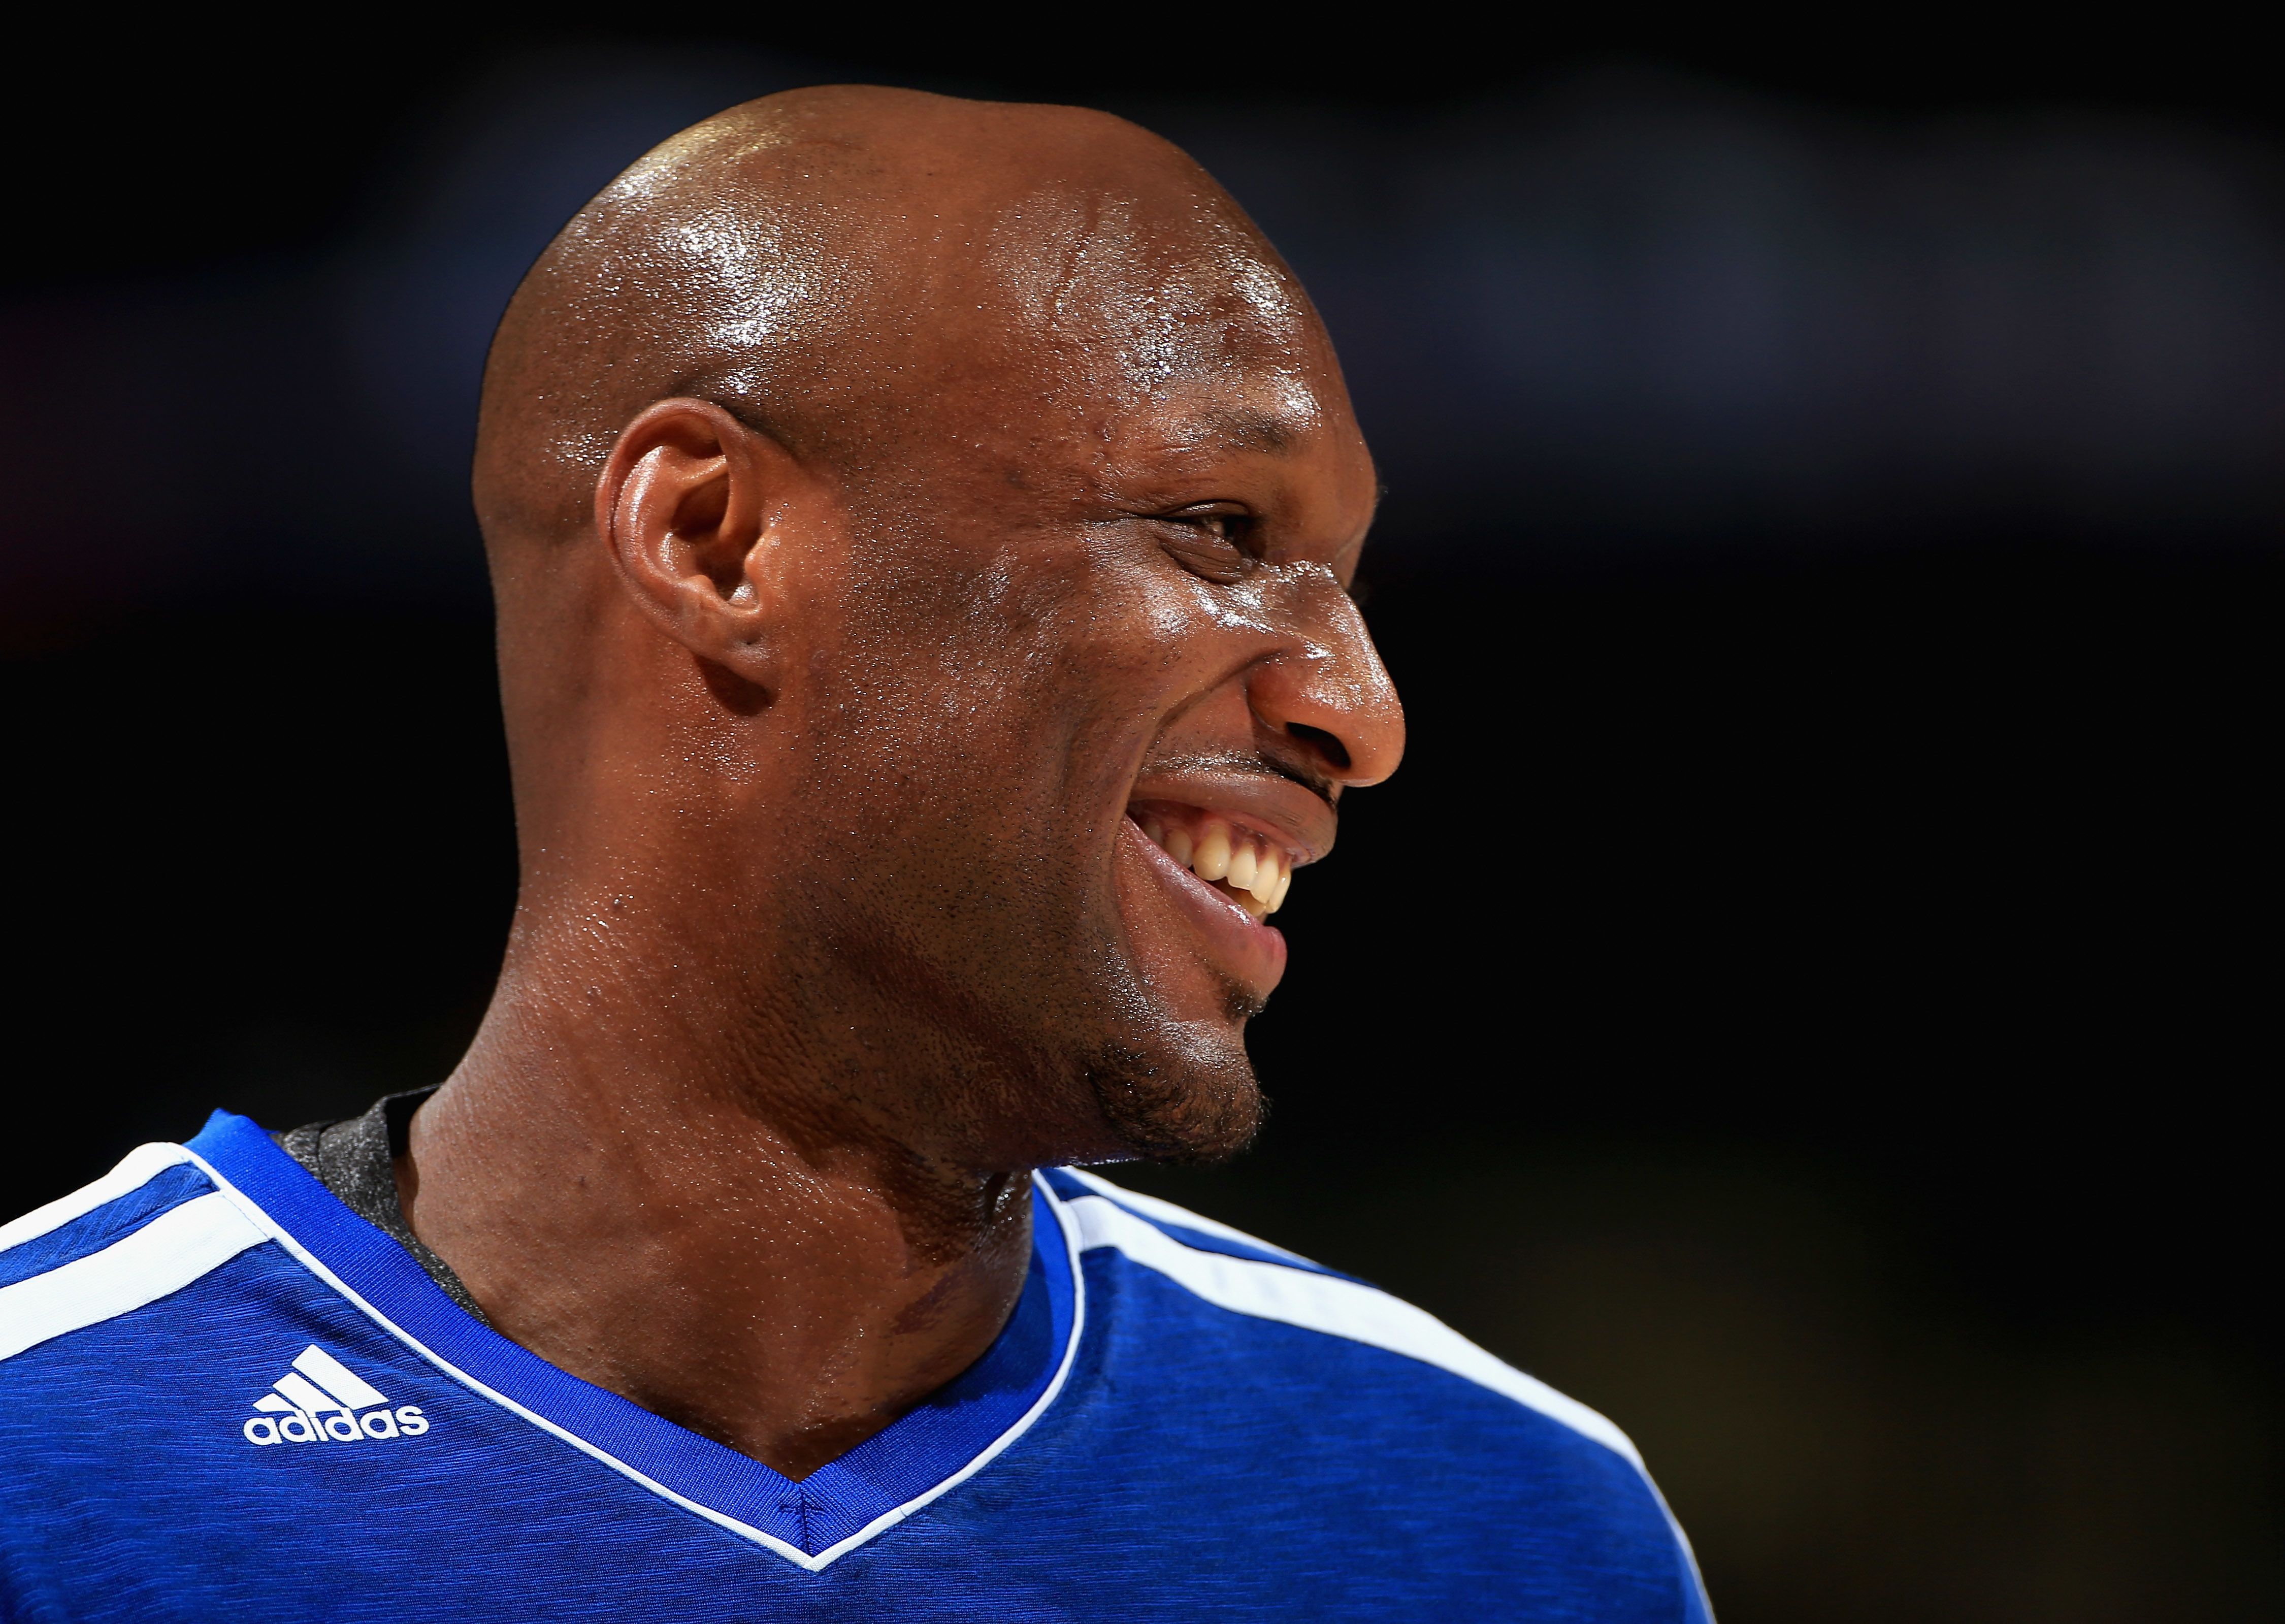 Lamar Odom Breaks Up With Dallas Mavericks – The Hollywood Reporter